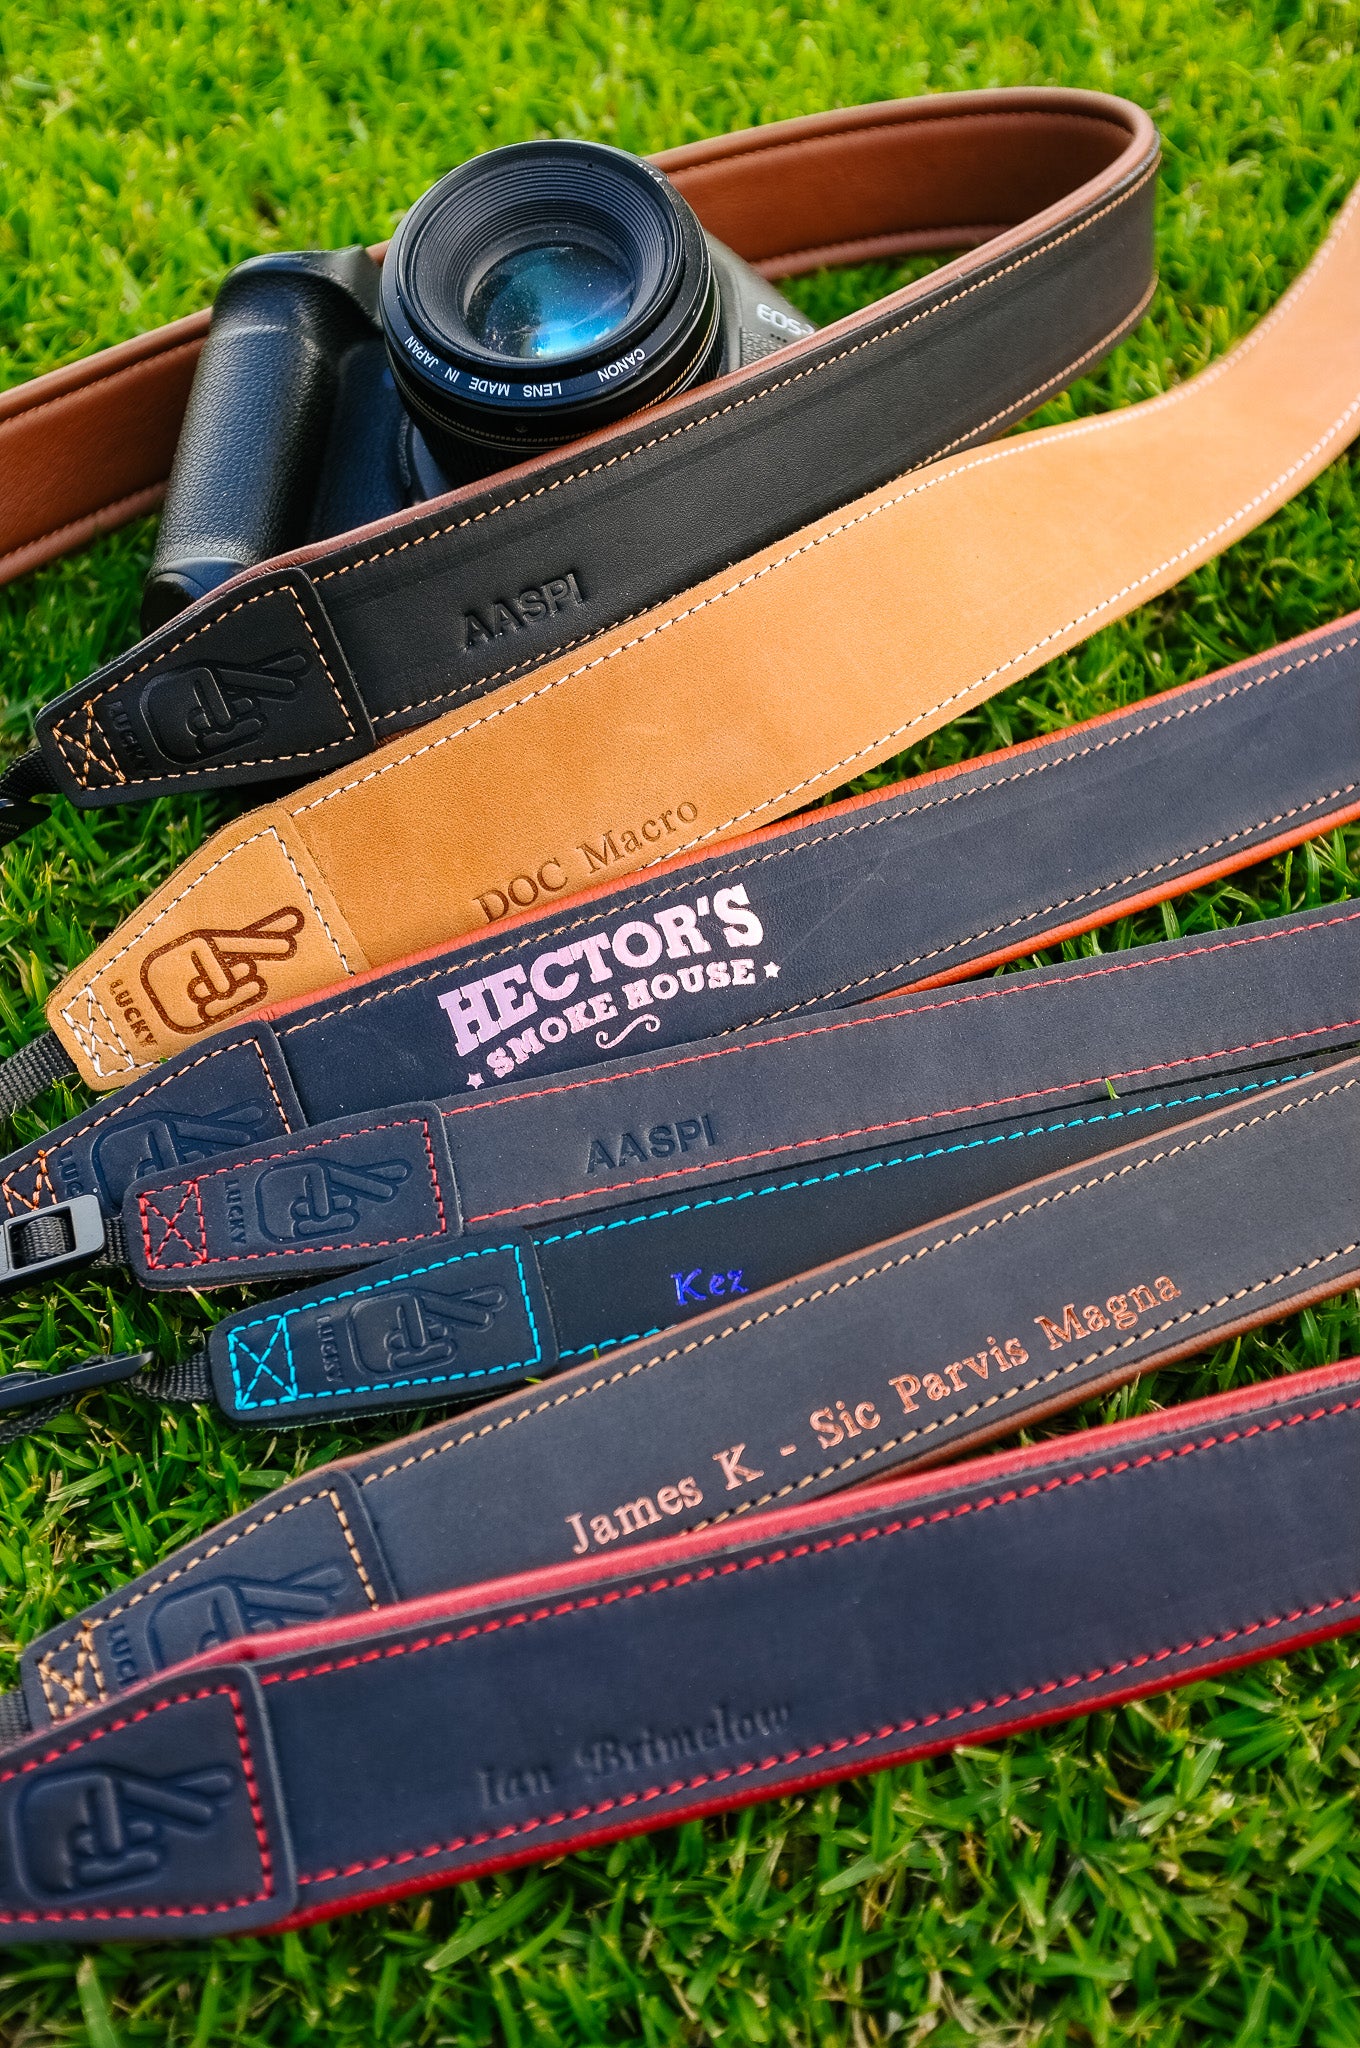 Range of leather camera straps all with different custom logos and personalisation